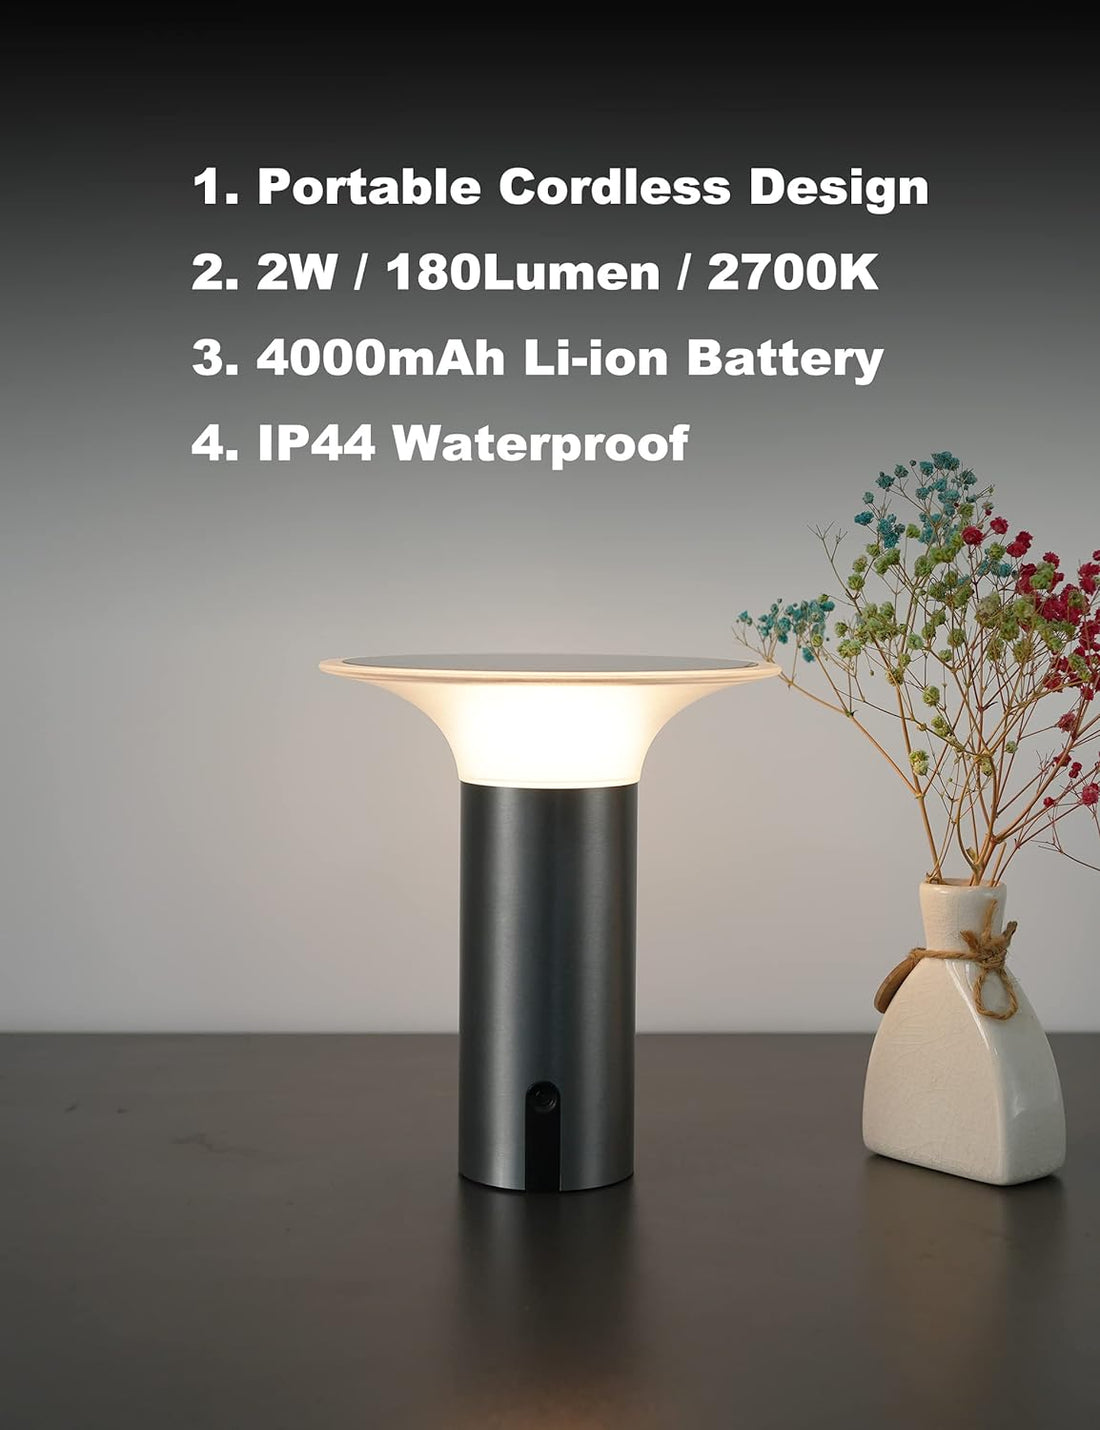 WEILAILUX Solar Outdoor Table Lamp Waterproof, Cordless Table Lamp Rechargeable, Dimmable Battery Operated Night Light for Home Bedroom Patio Camping (Gold)